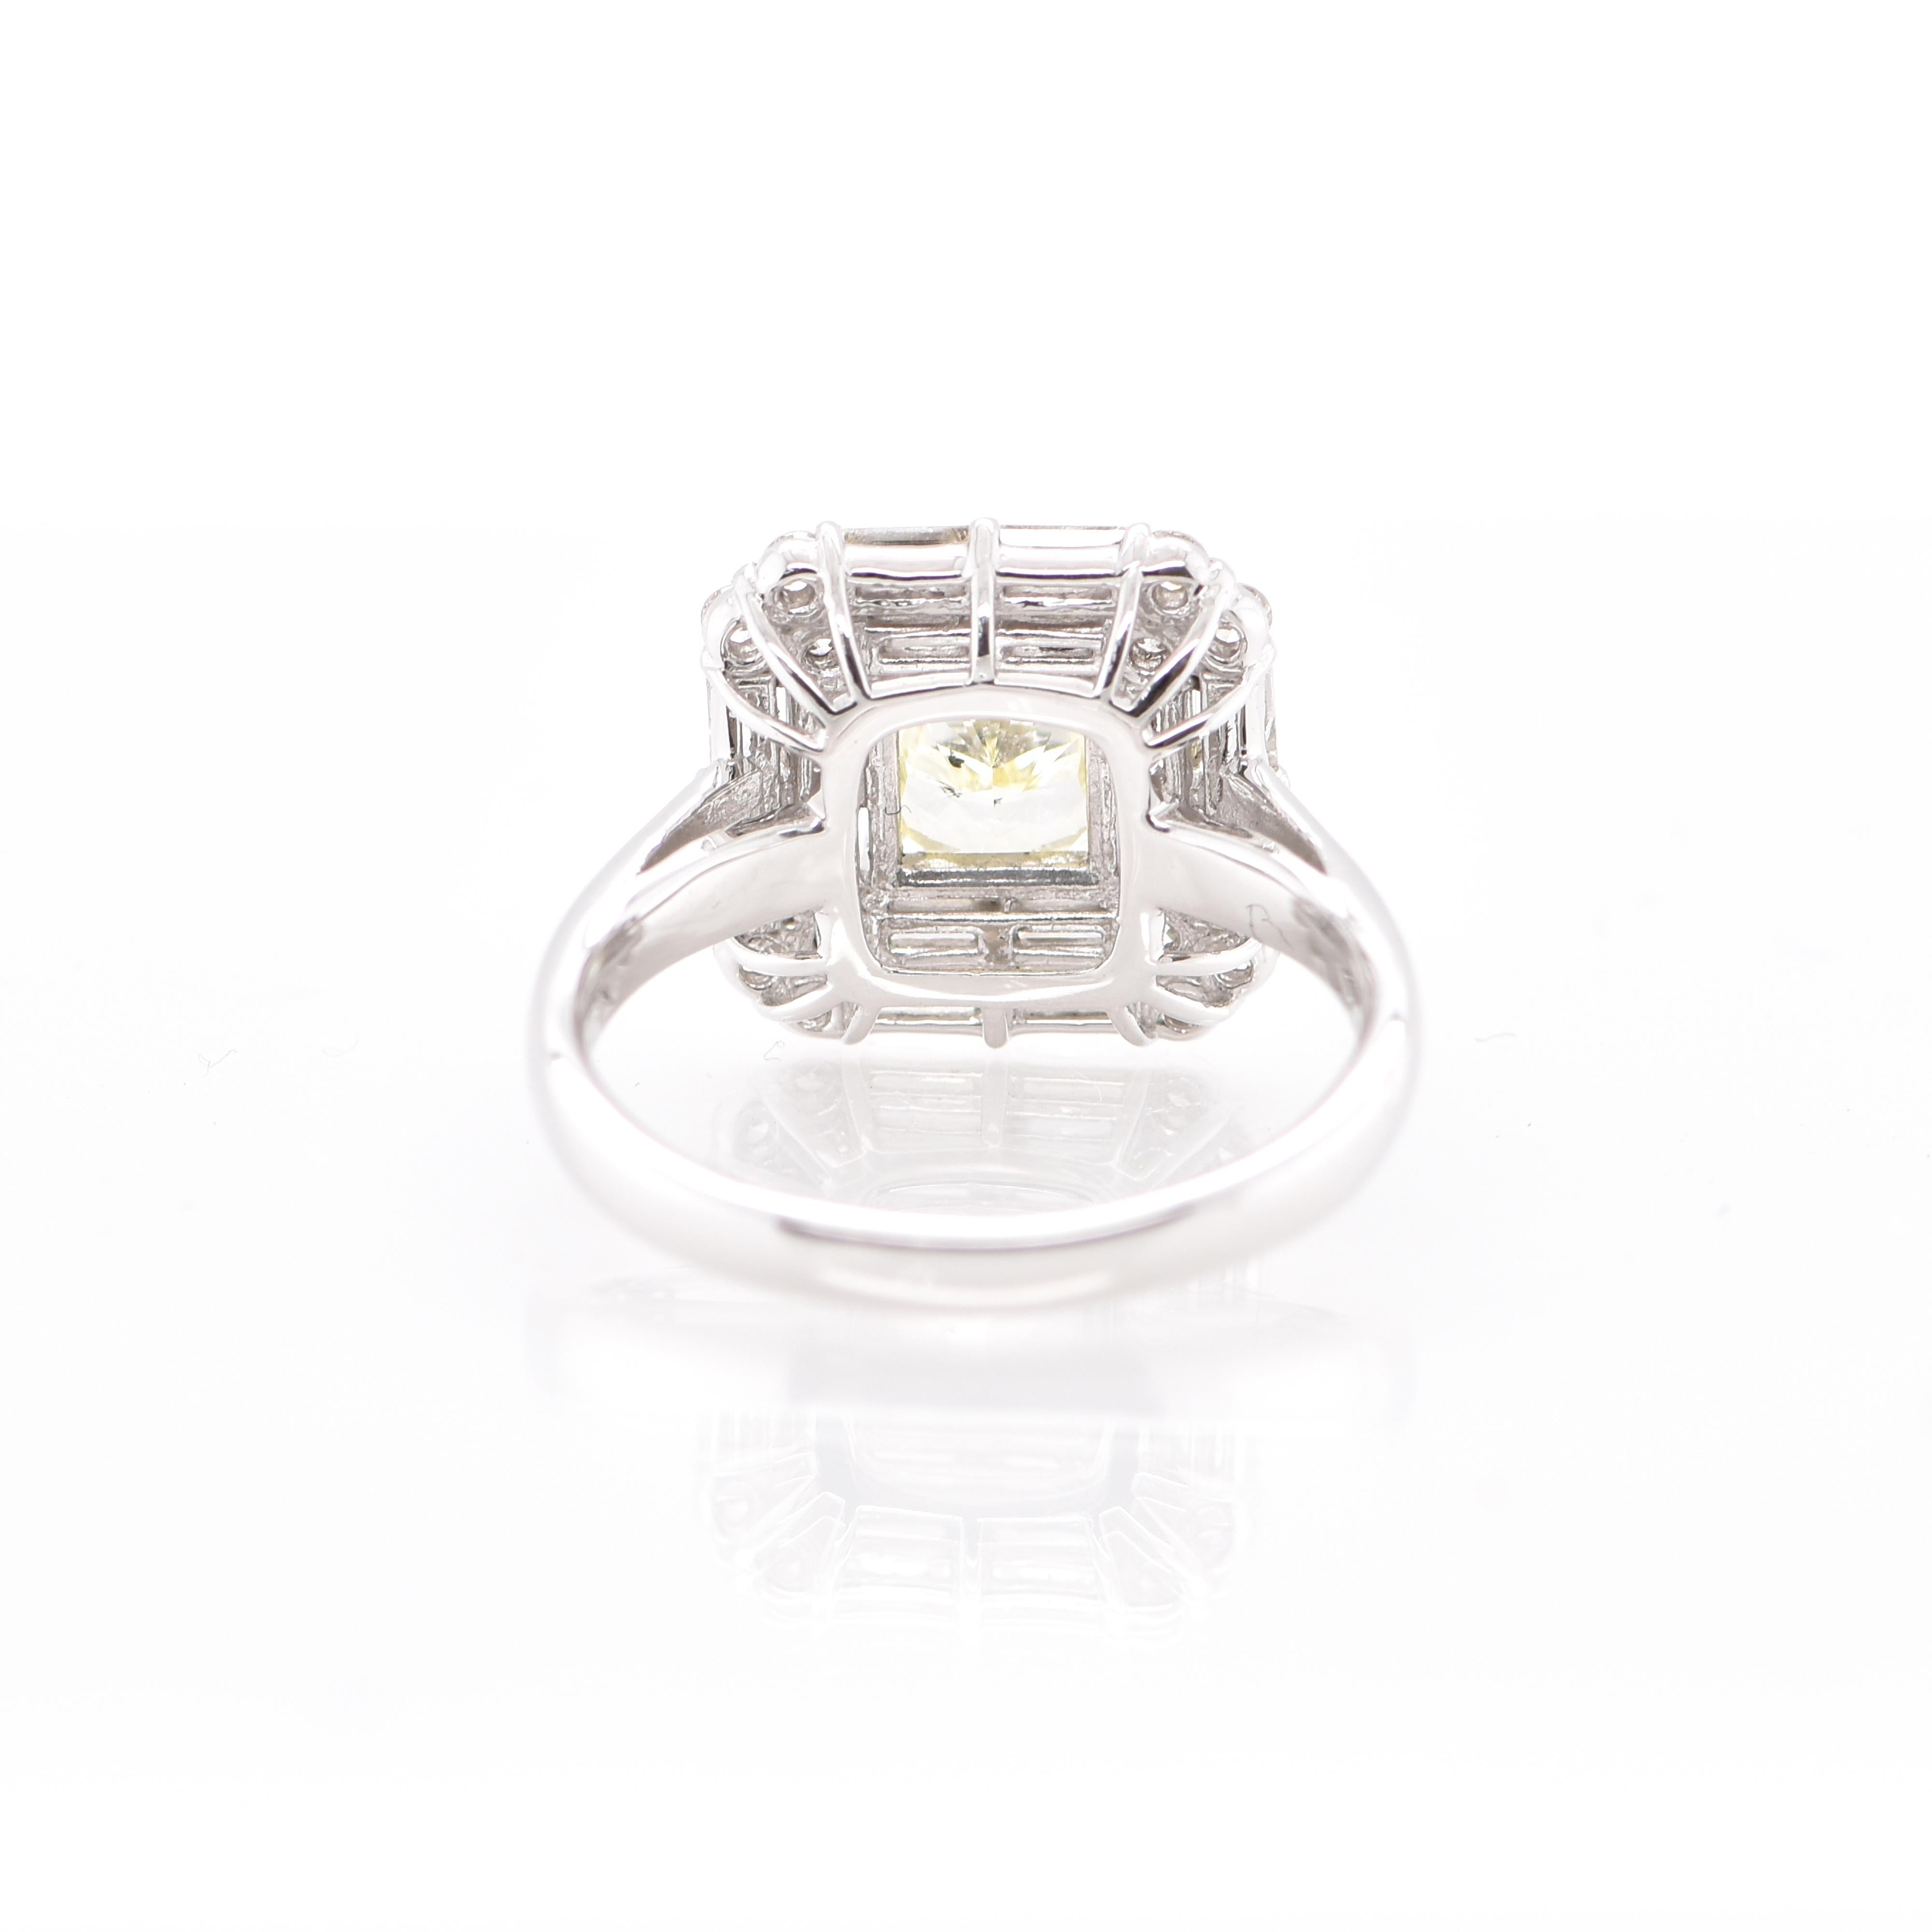 An gorgeous Engagement Cluster Ring featuring a SI-1 Light Yellow Diamond and 0.80 Carats of White Diamond Accents set in Platinum. Diamonds have been adorned and cherished throughout human history and date back to thousands of years. They are rated